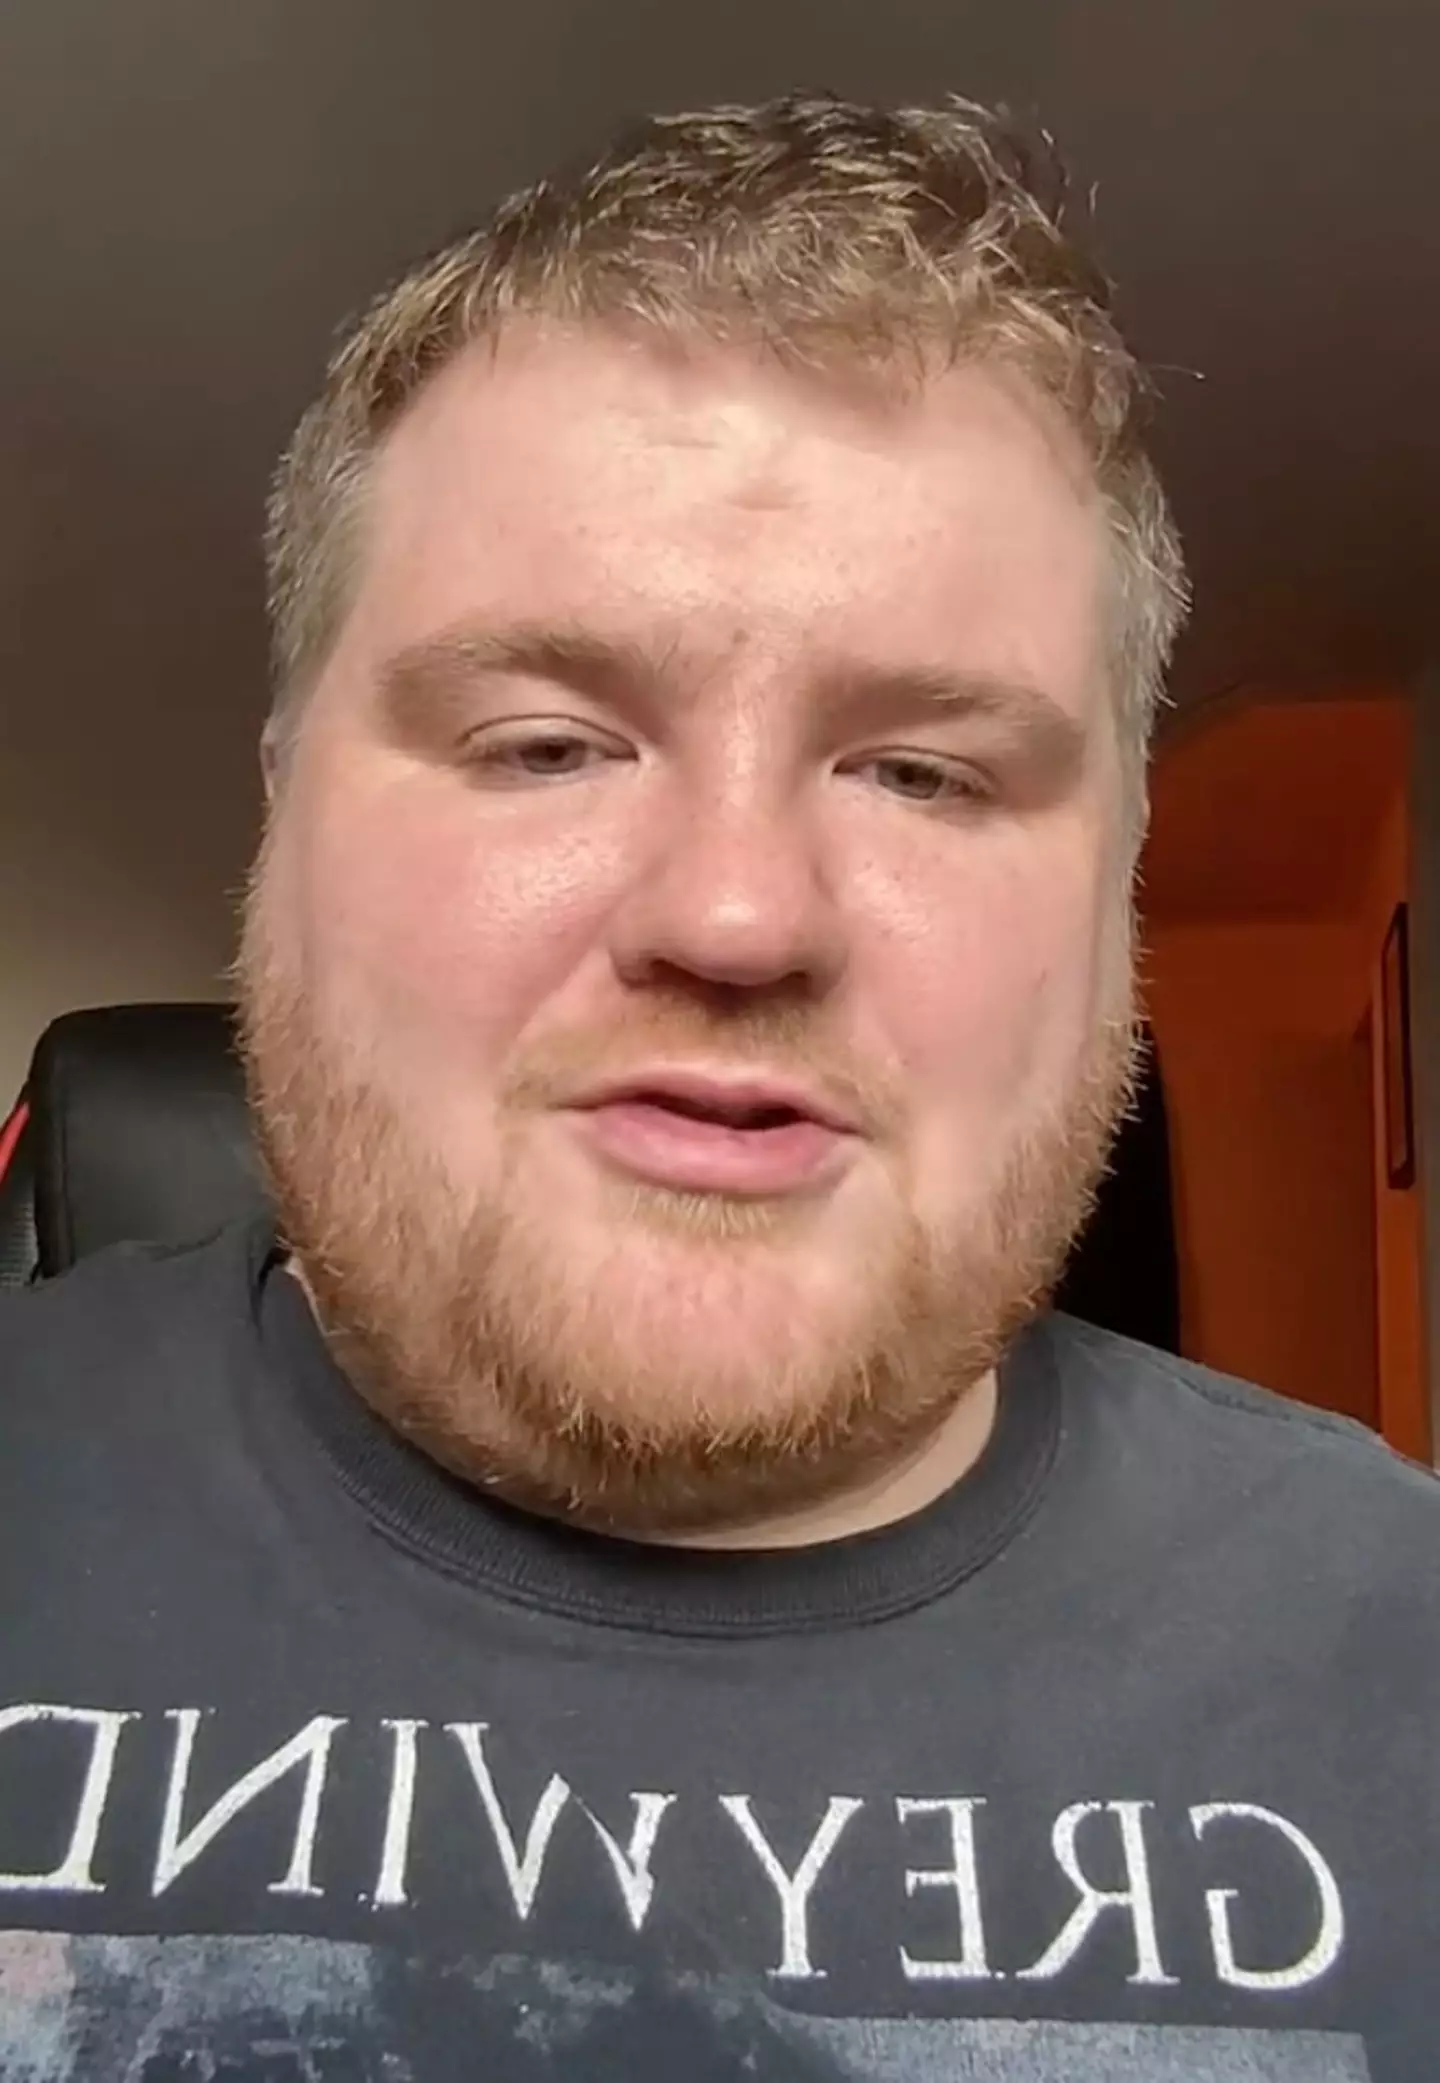 Ethan Lawrence shared an emotional video about how tough acting is (TikTok/@ethandlawrence)